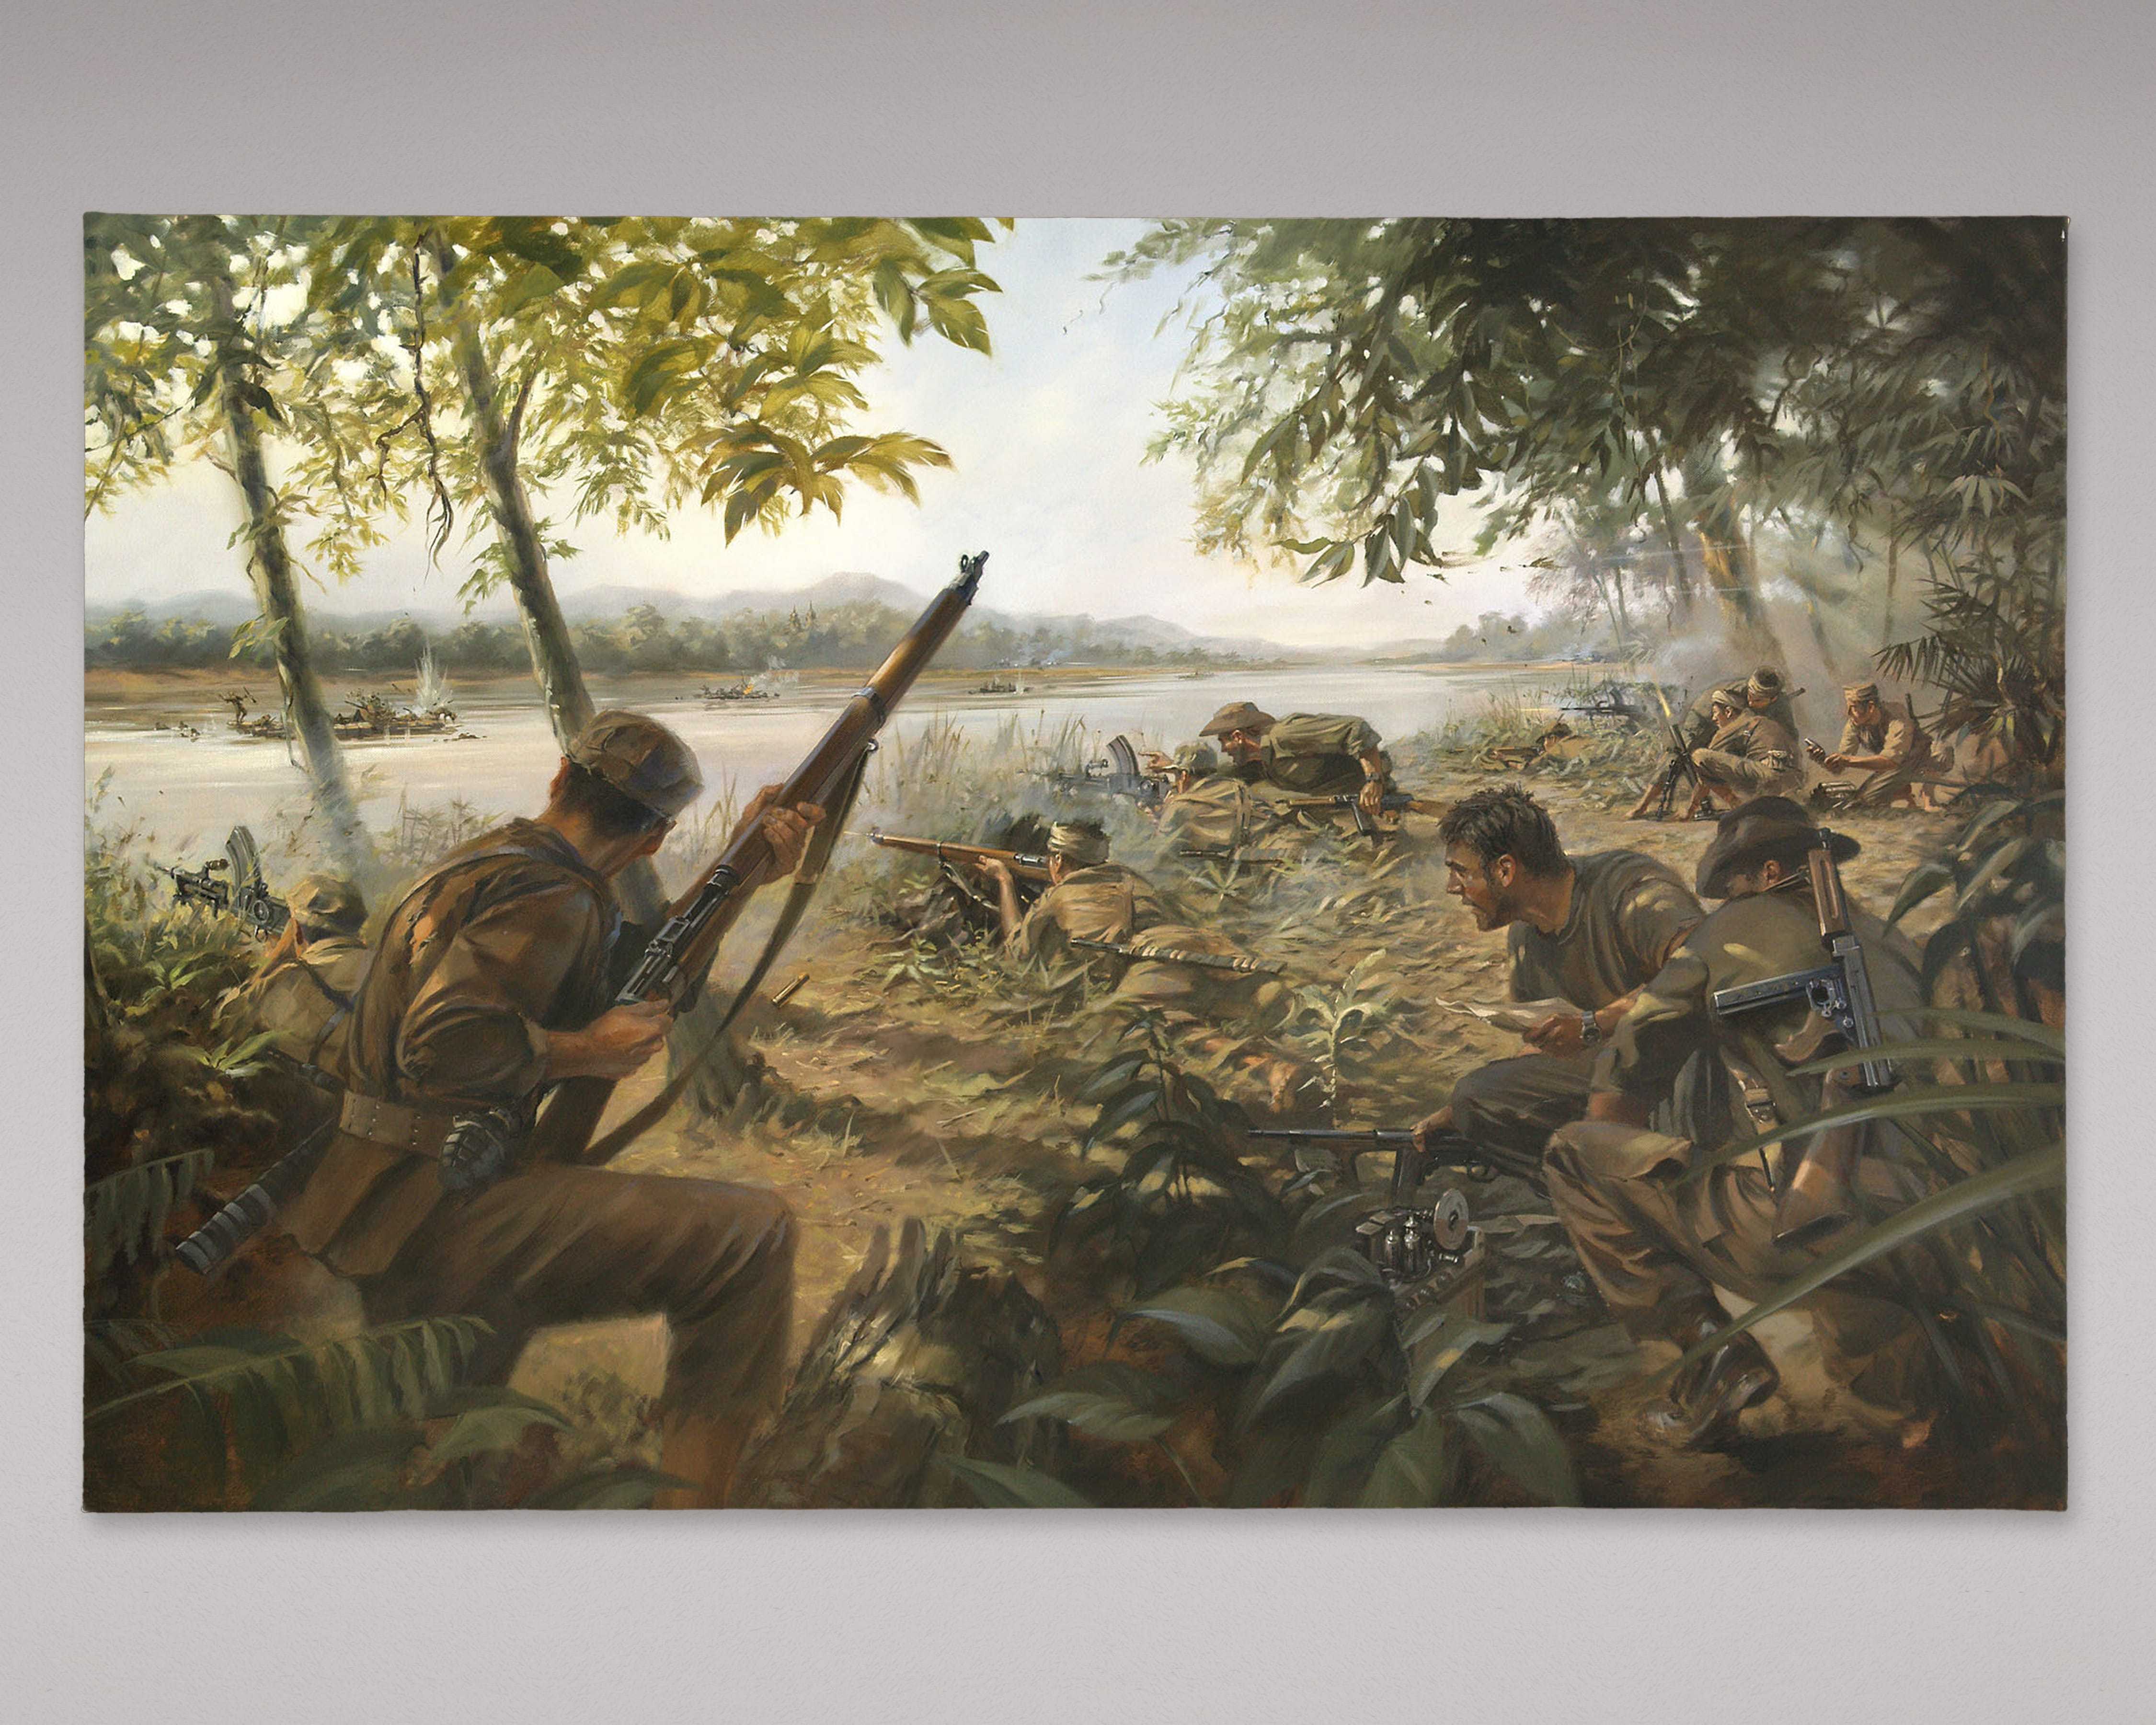 An oil painting of OSS-trained soldiers hiding in the brush to ambush Japanese soldiers on the river